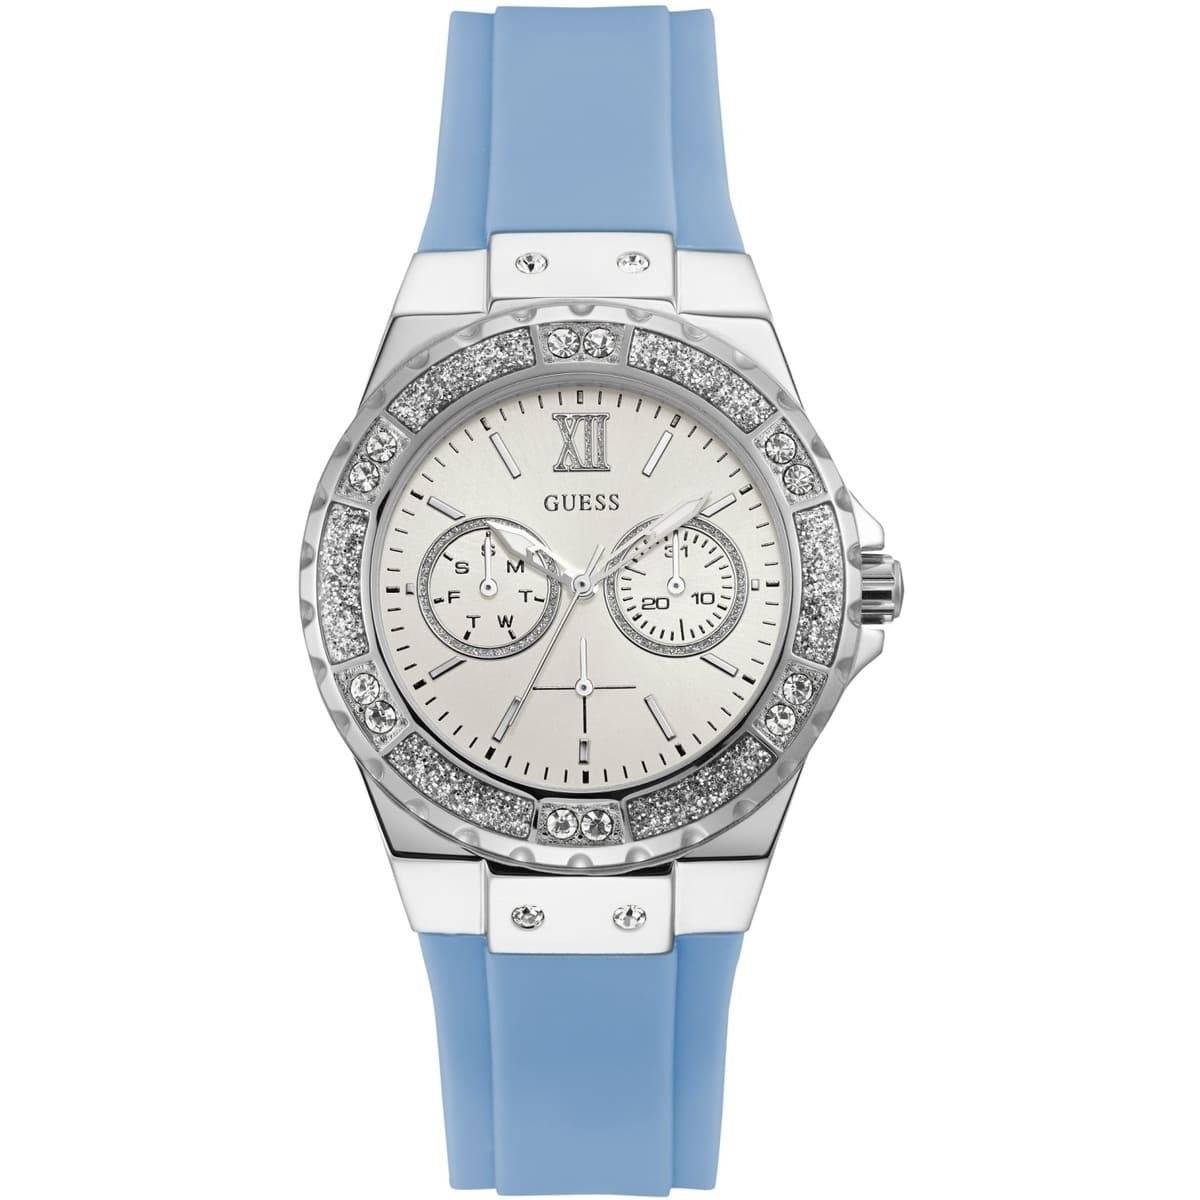 ĐỒNG HỒ ĐEO TAY NỮ GUESS BLUE SILICON LIMELIGHT WOMEN WATCH W1053L5 2